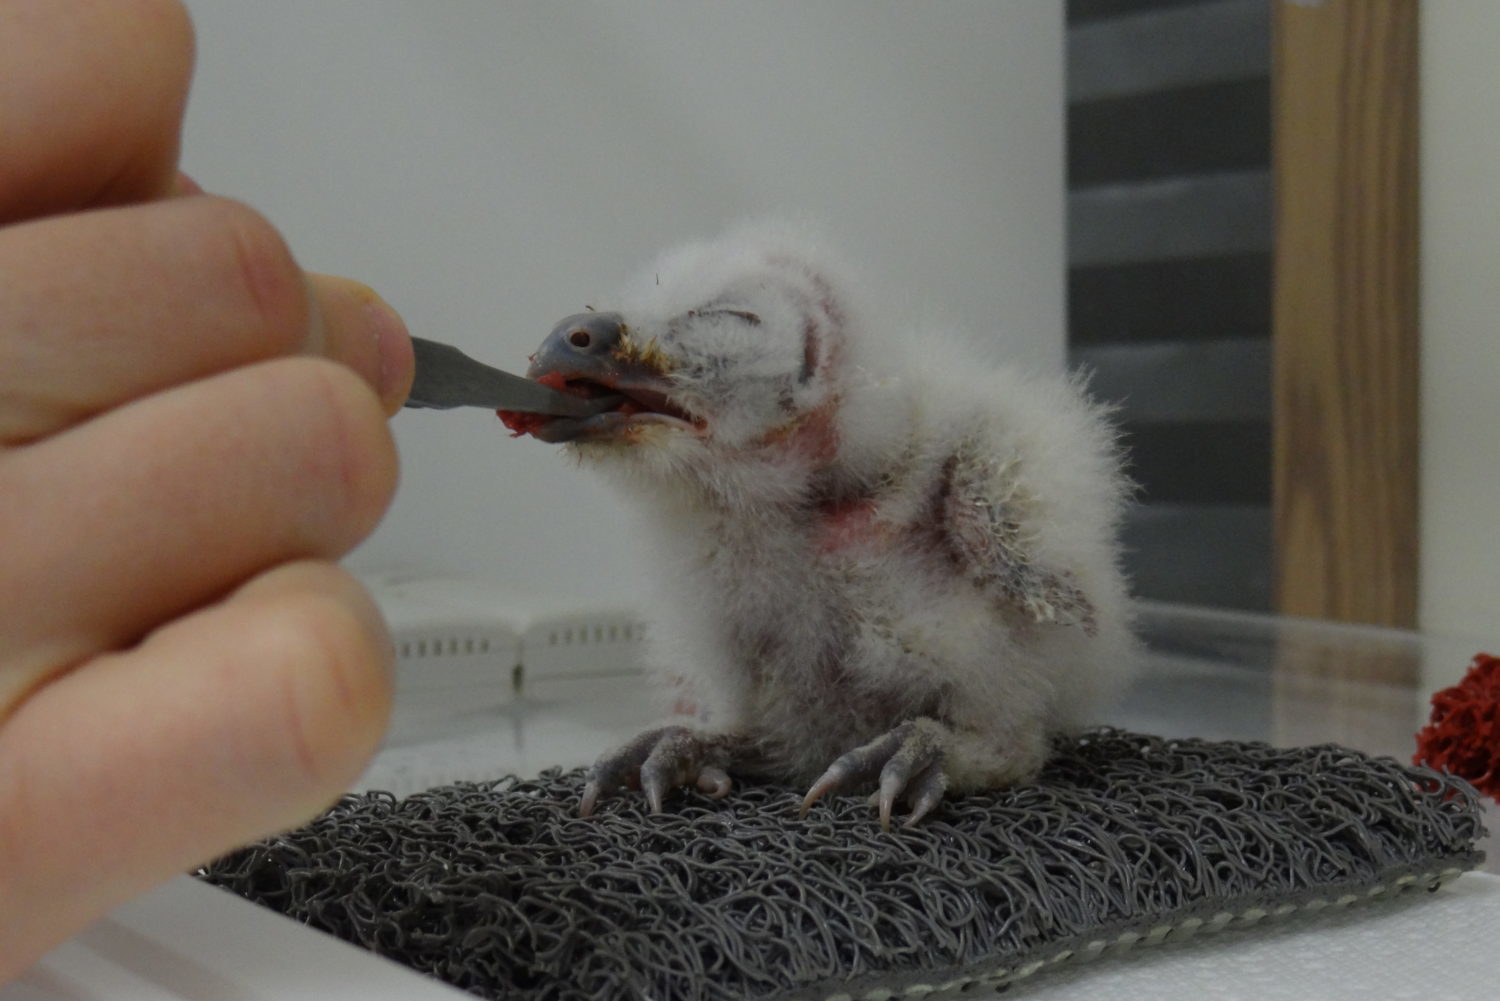 Dante at about 10 days old being fed raw, euthanized rat meat. Photo: Northern Spotted Owl Breeding Centre